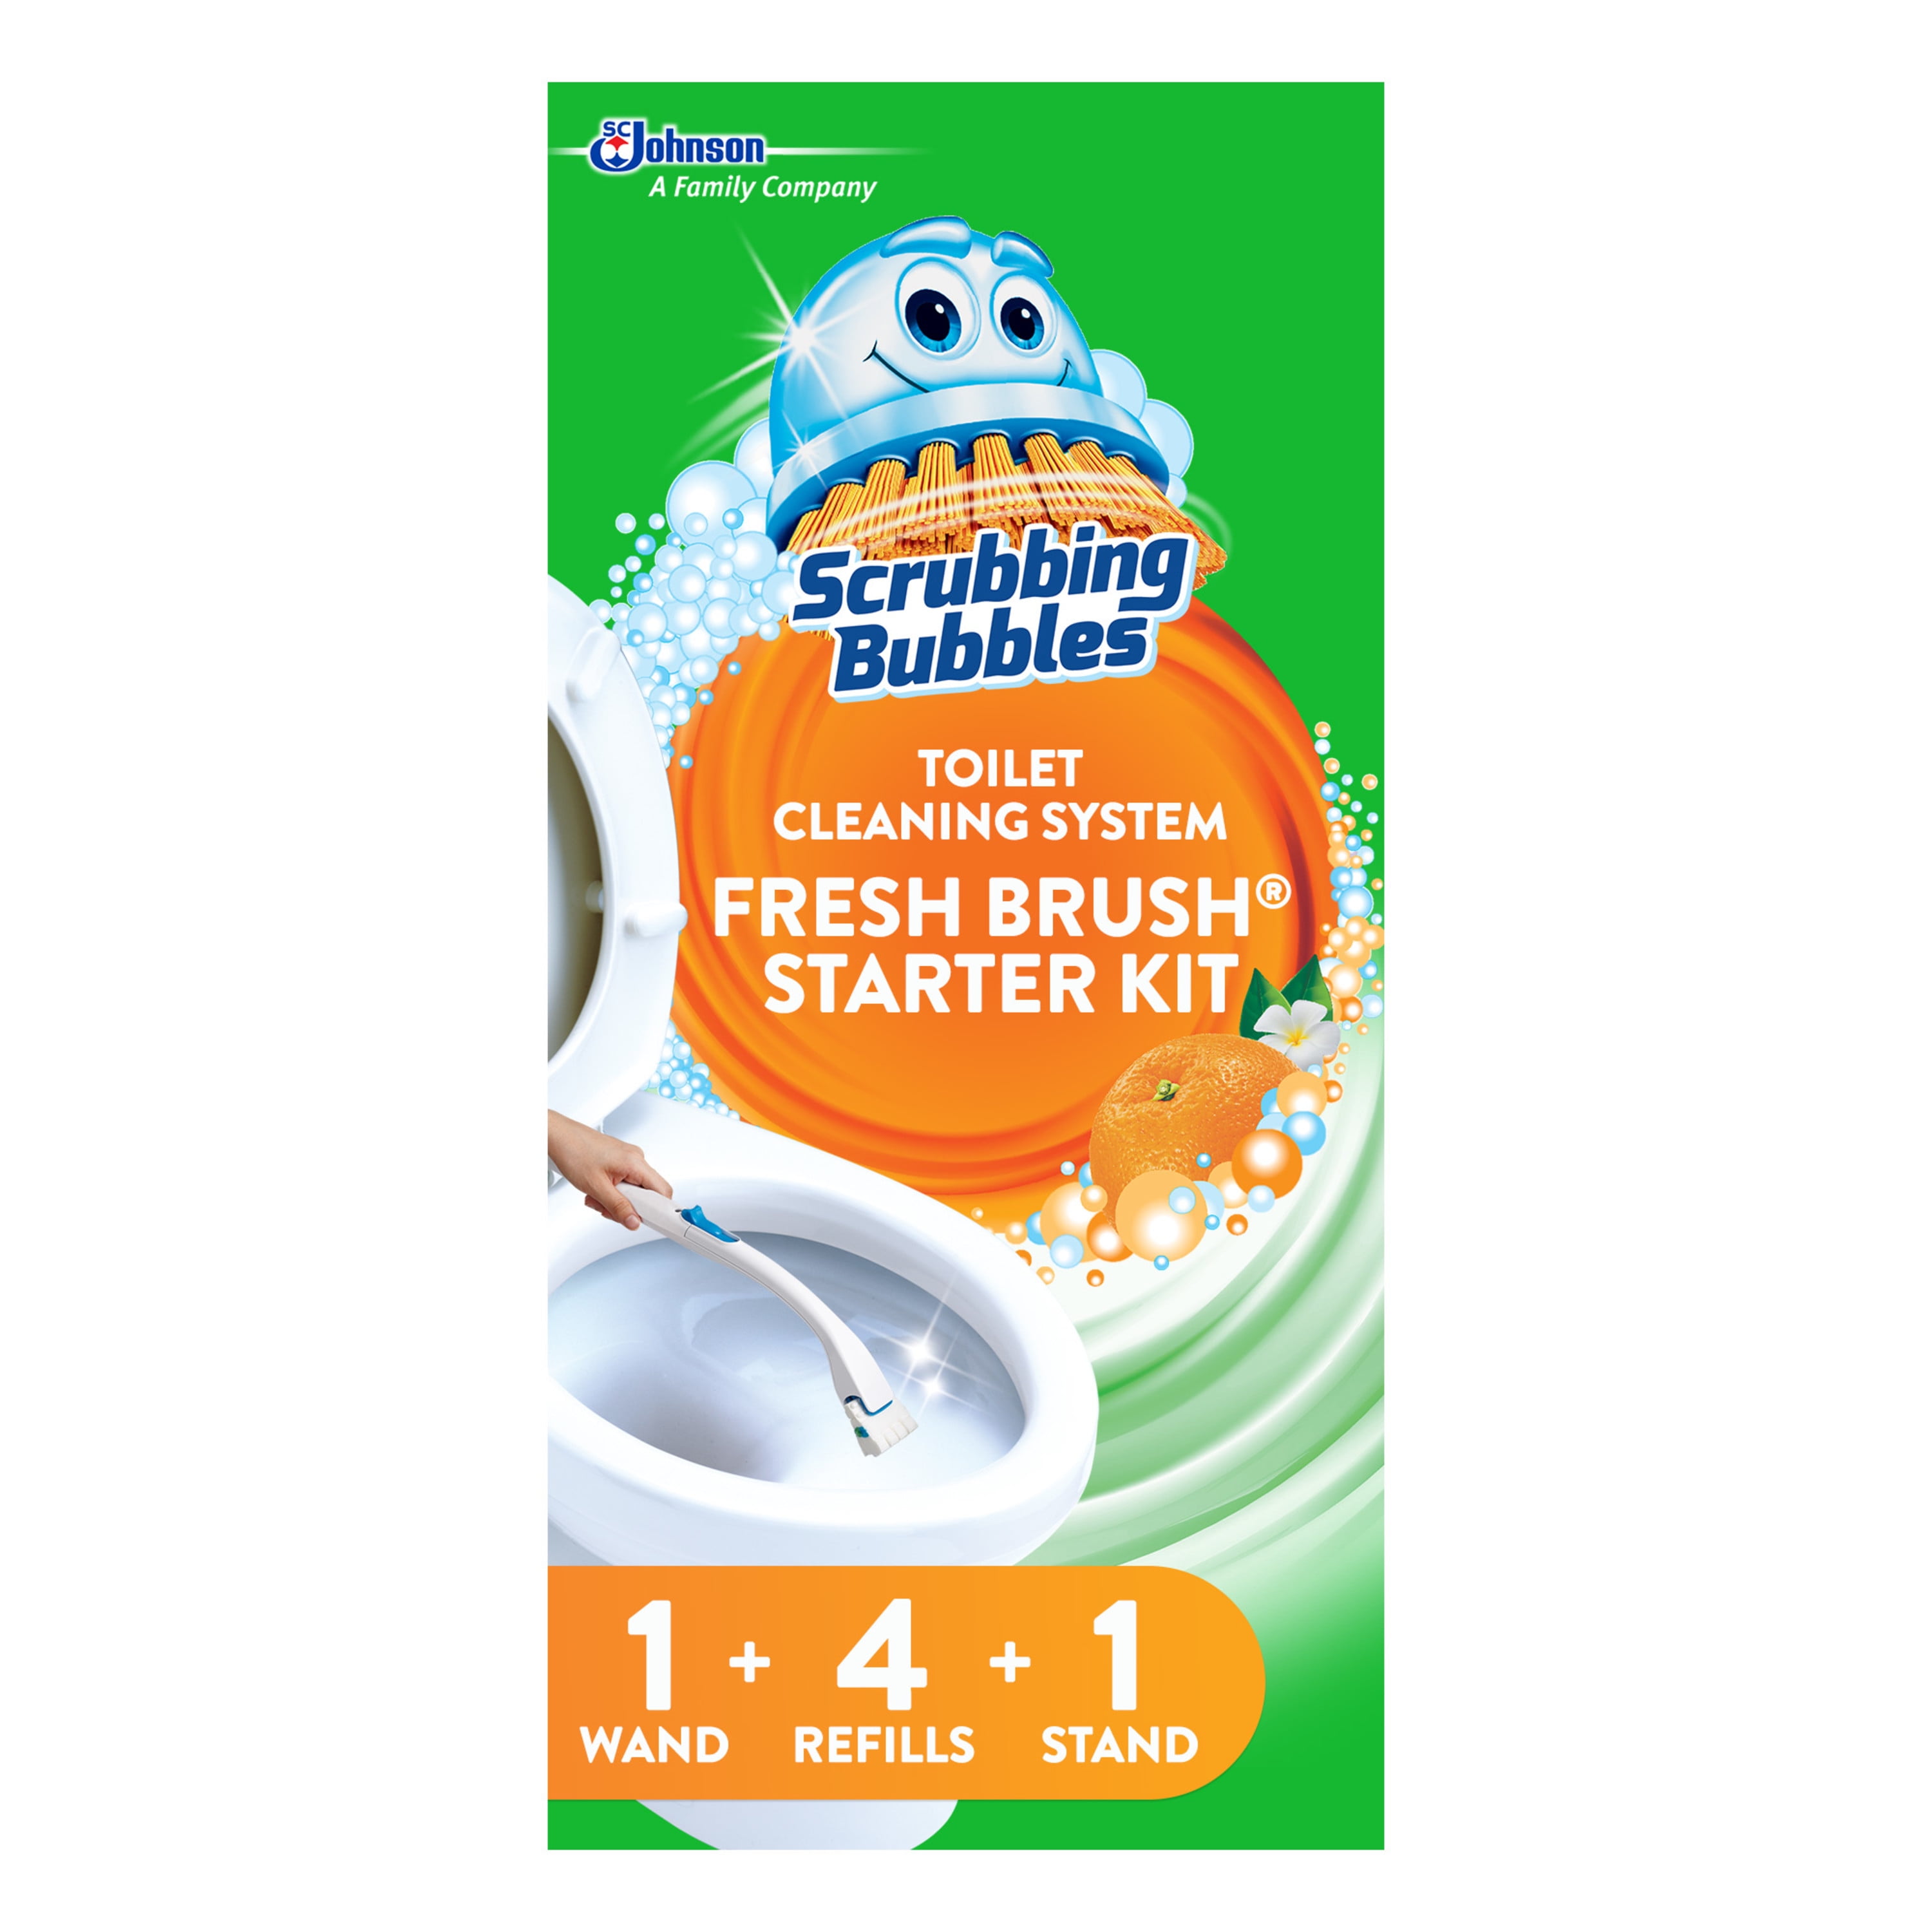 NEW Scrubbing Bubbles Fresh Brush Toilet Cleaning System Flushable Refill 20 ct 